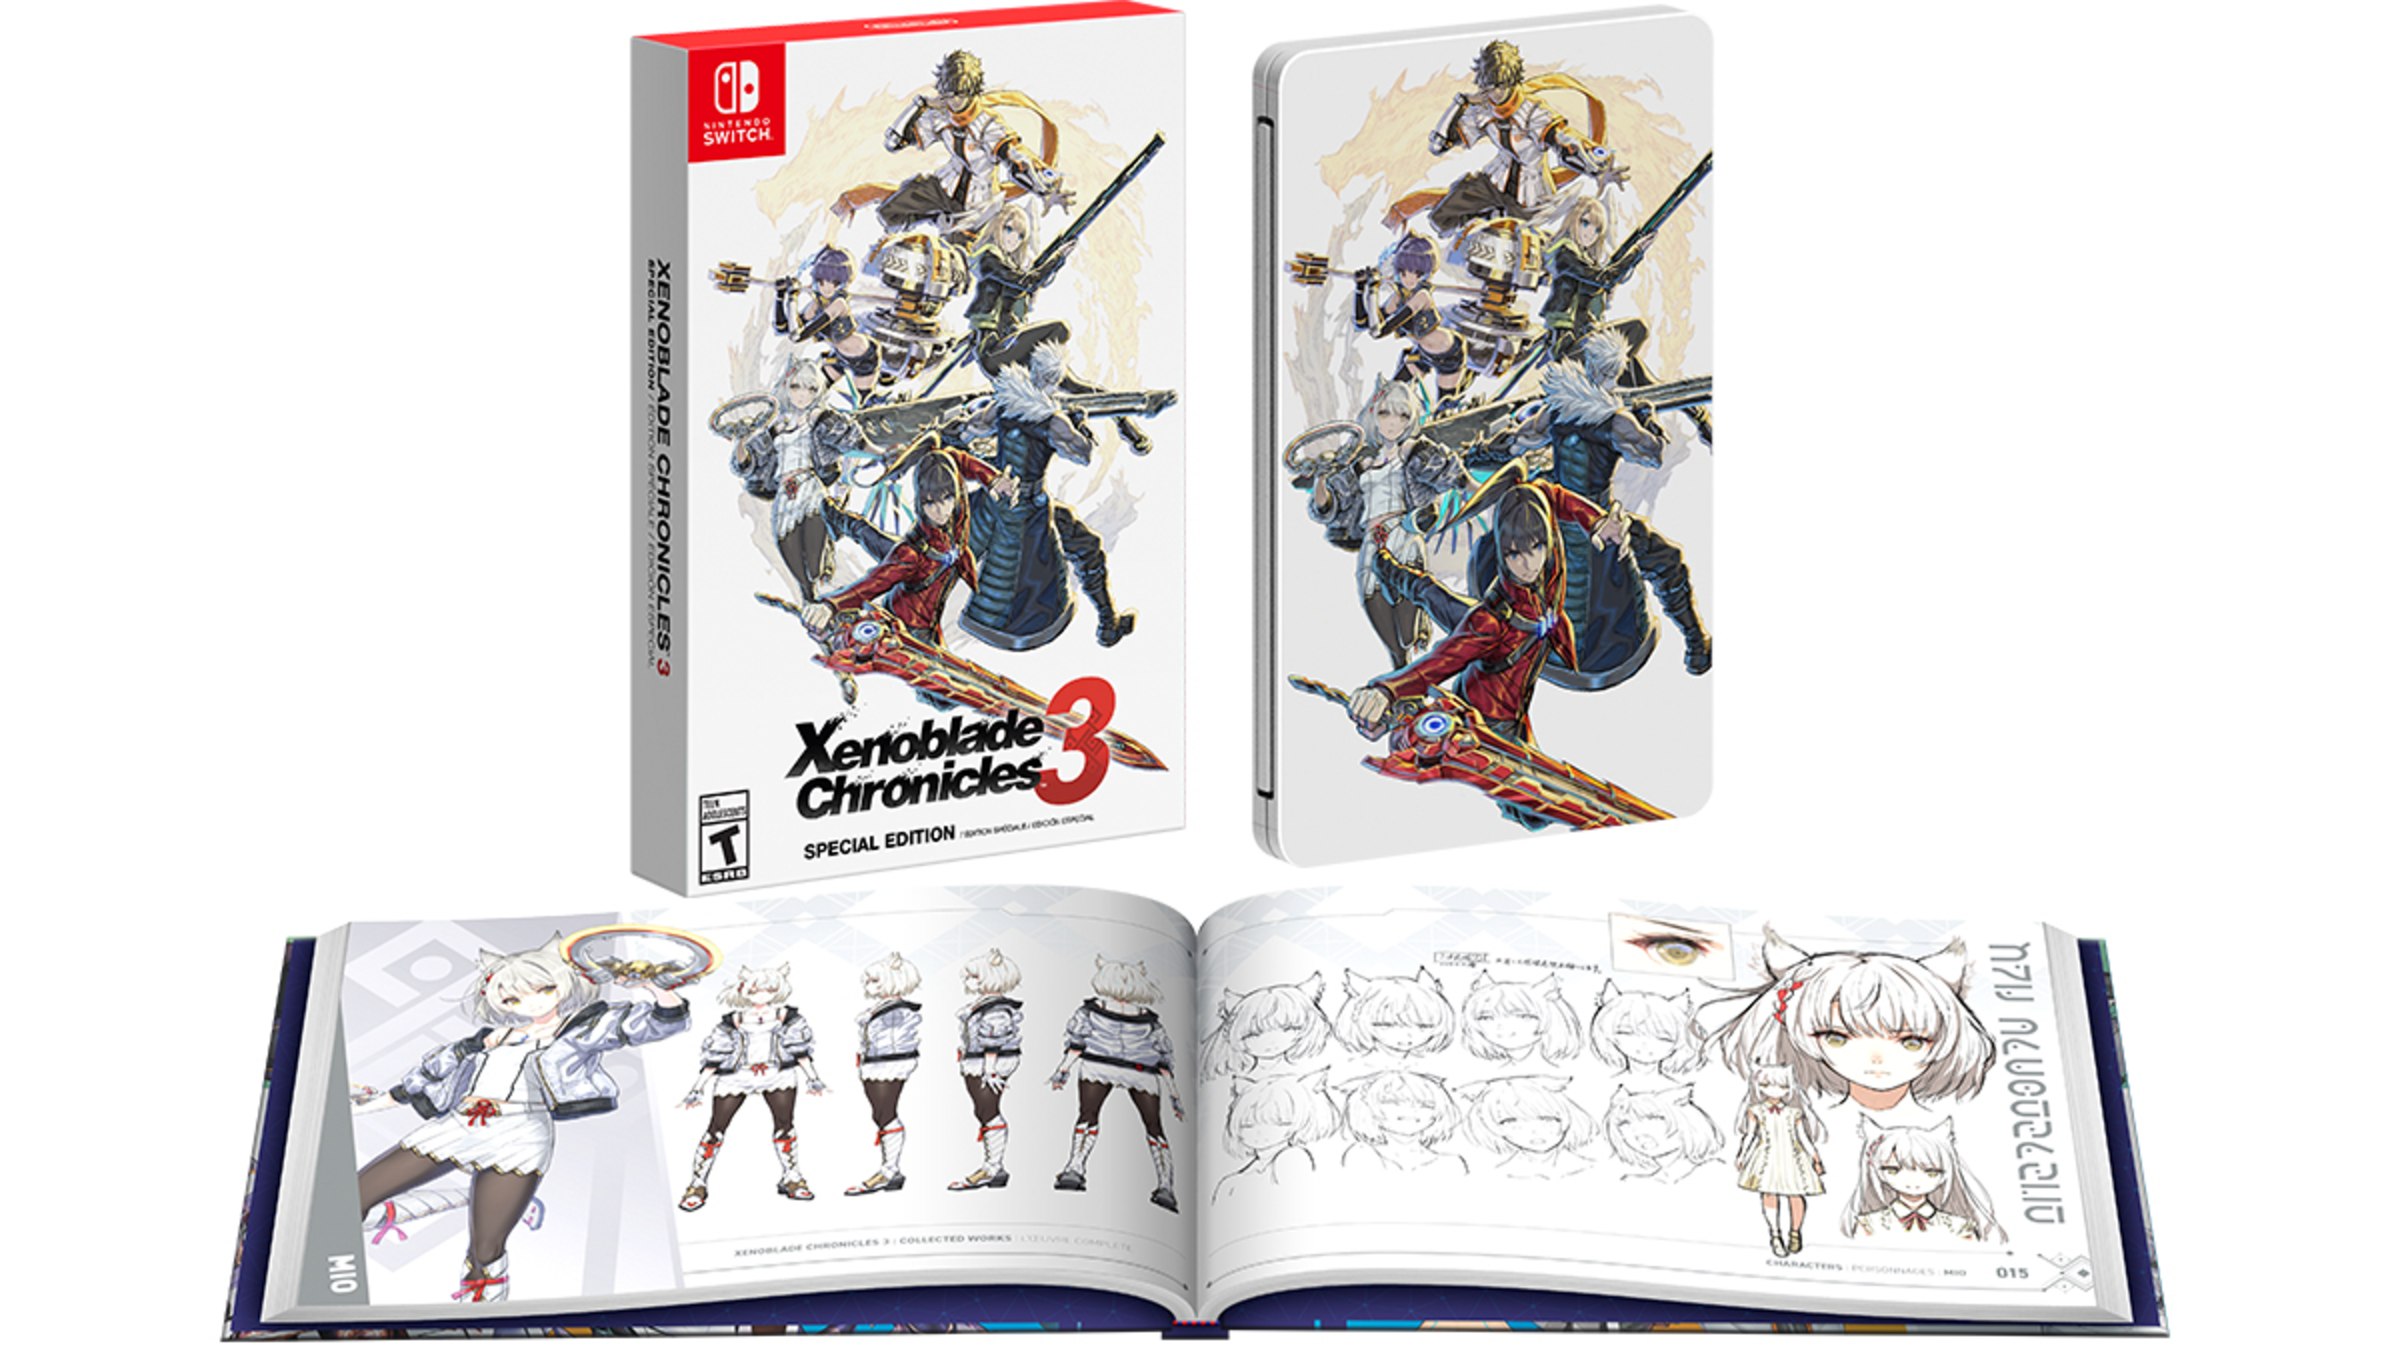 Xenoblade3 Collector's Edition (特典のみ) - 家庭用ゲームソフト